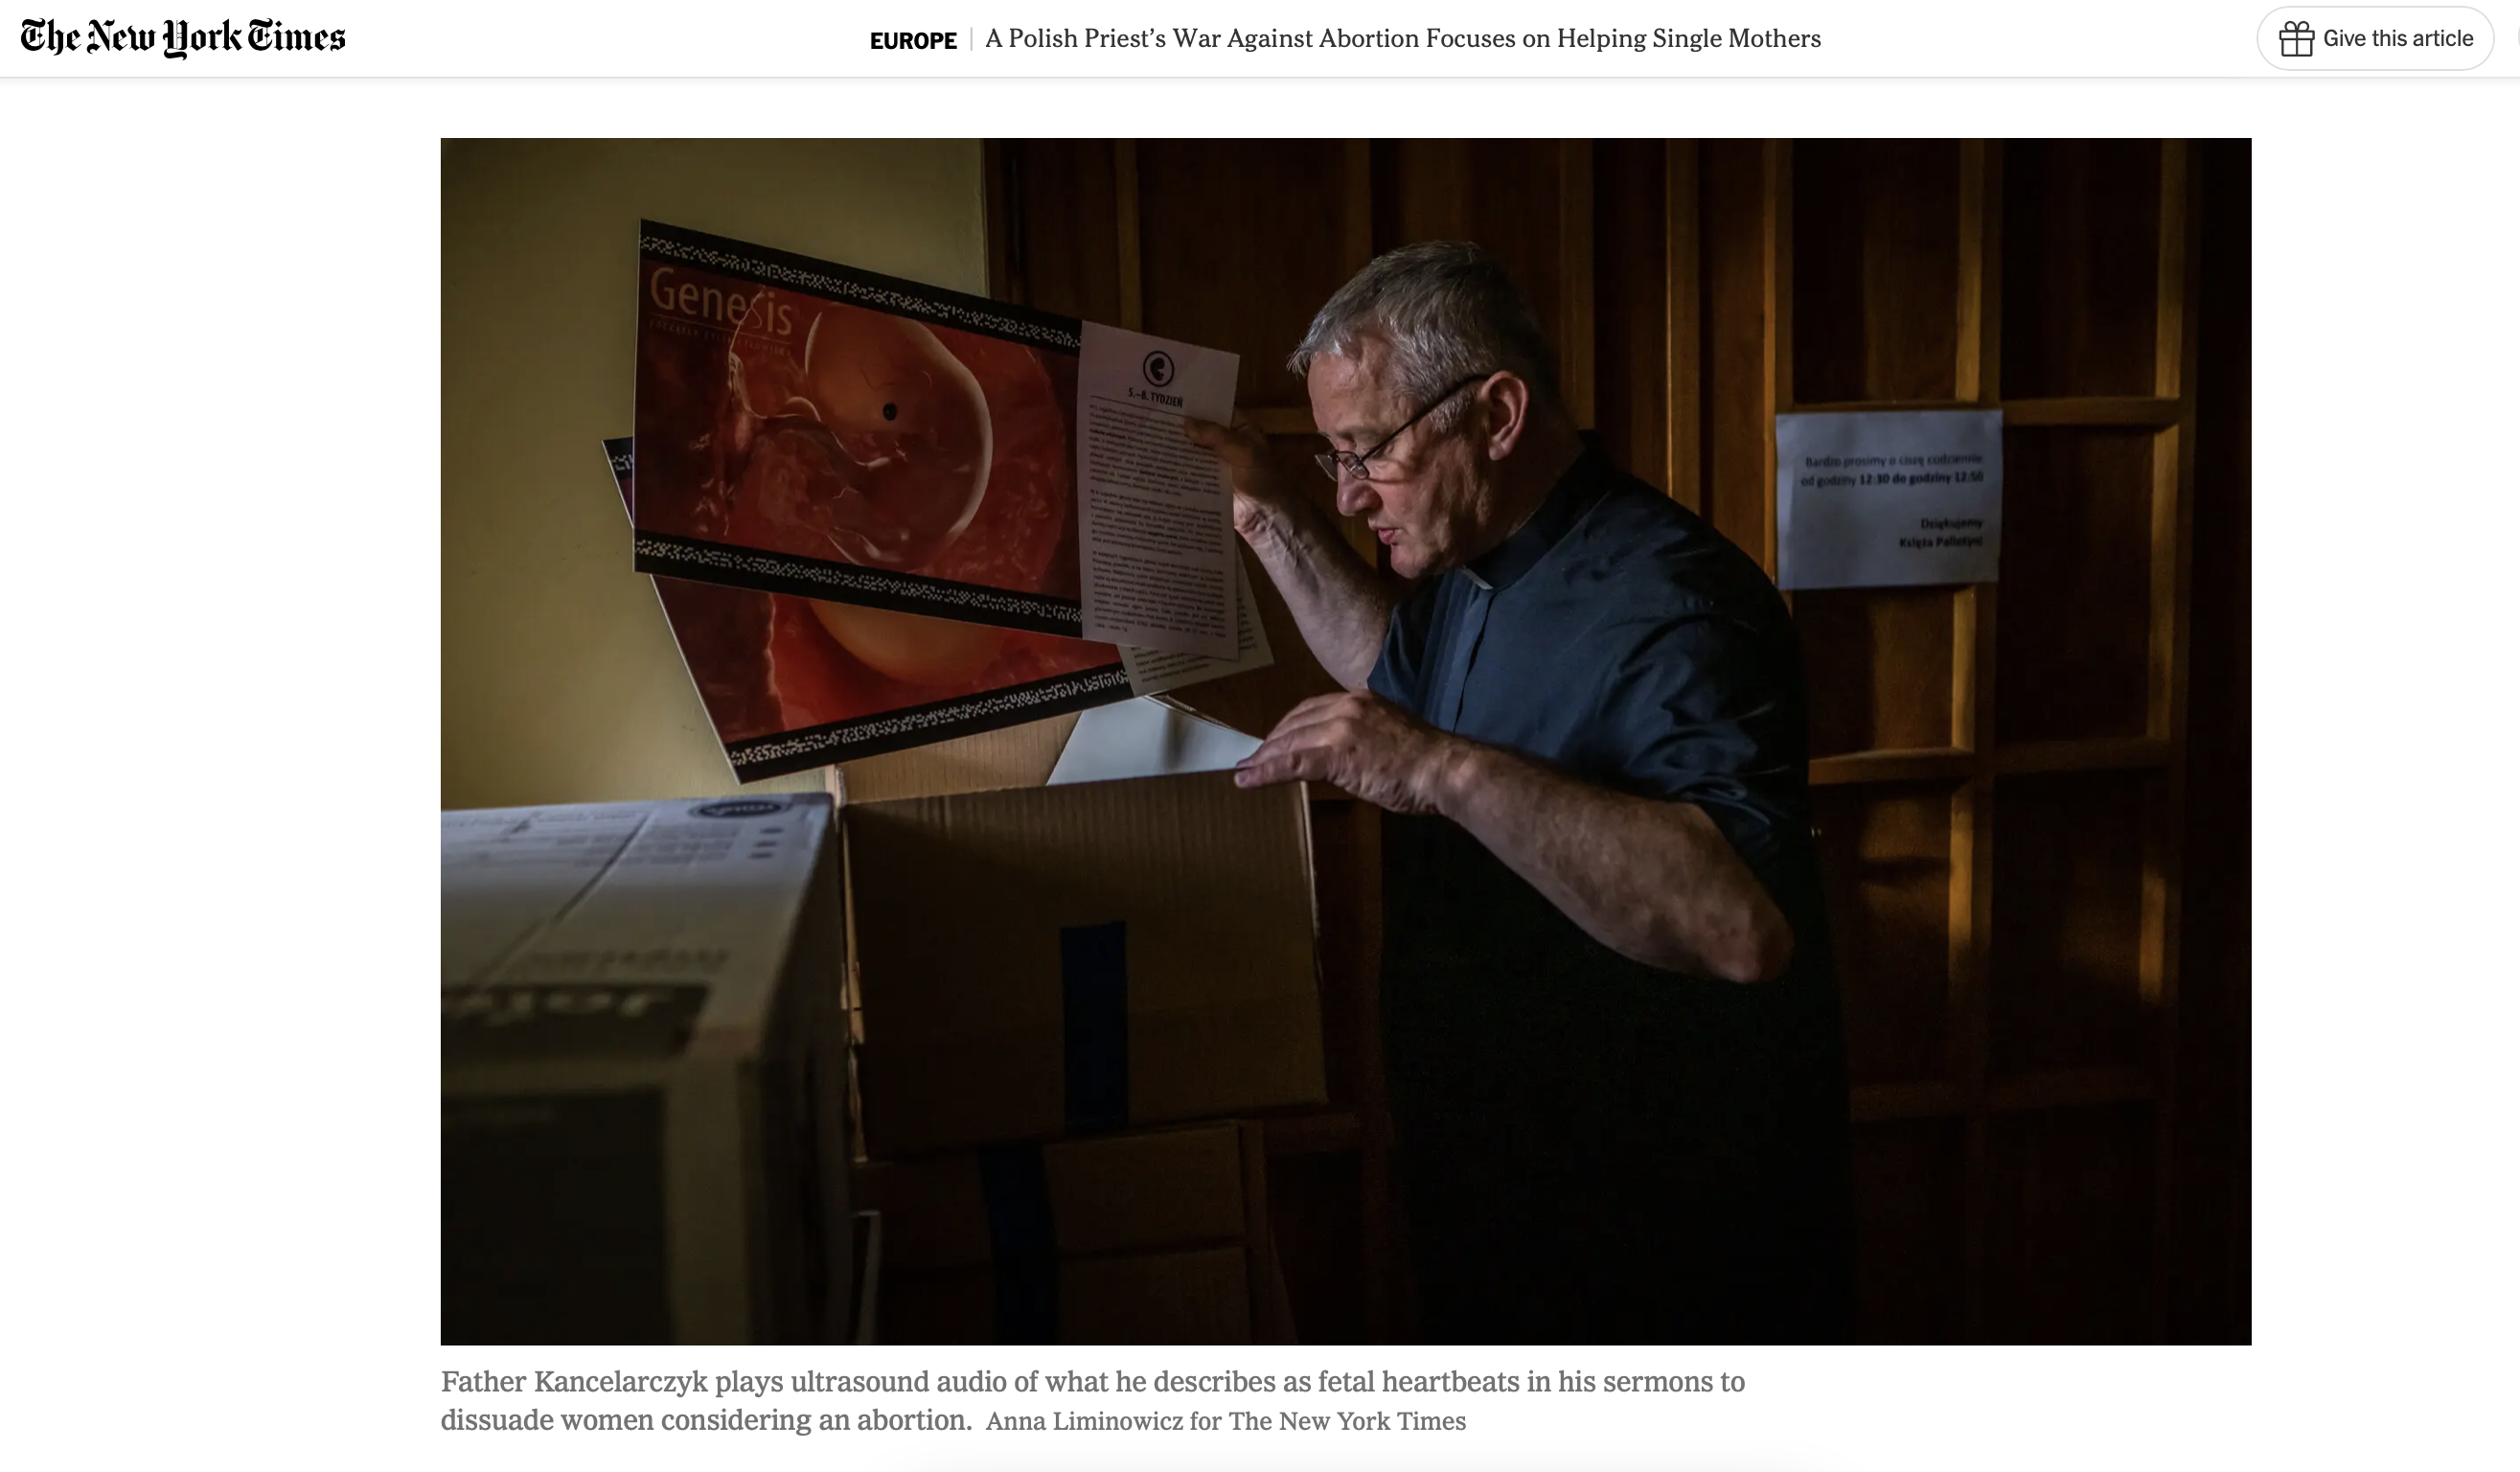 Art and Documentary Photography - Loading the_new_york_times_anna_liminowicz_2.png